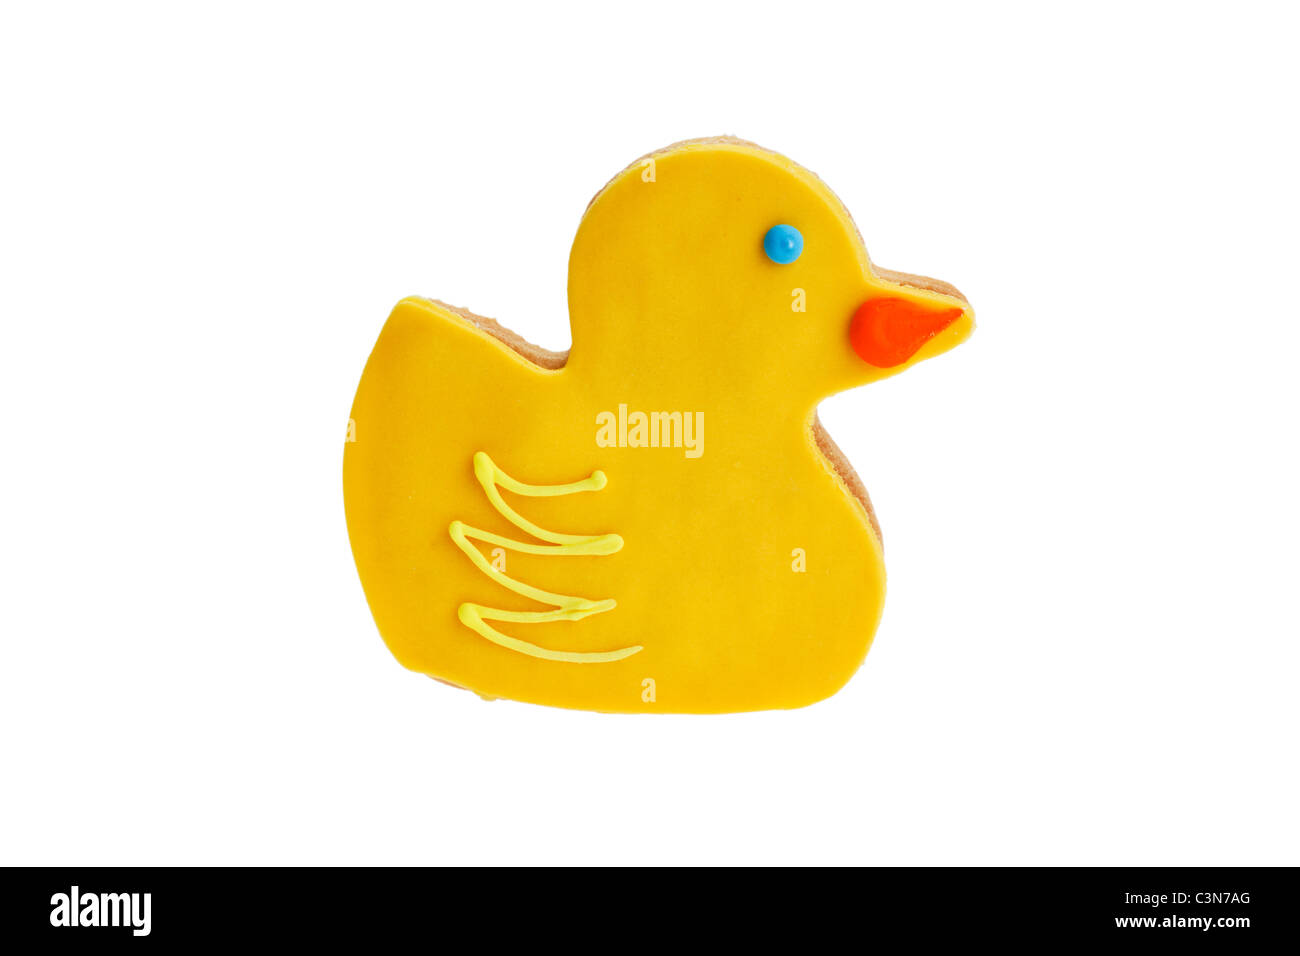 Novelty Yellow Duck Animal Biscuit Stock Photo